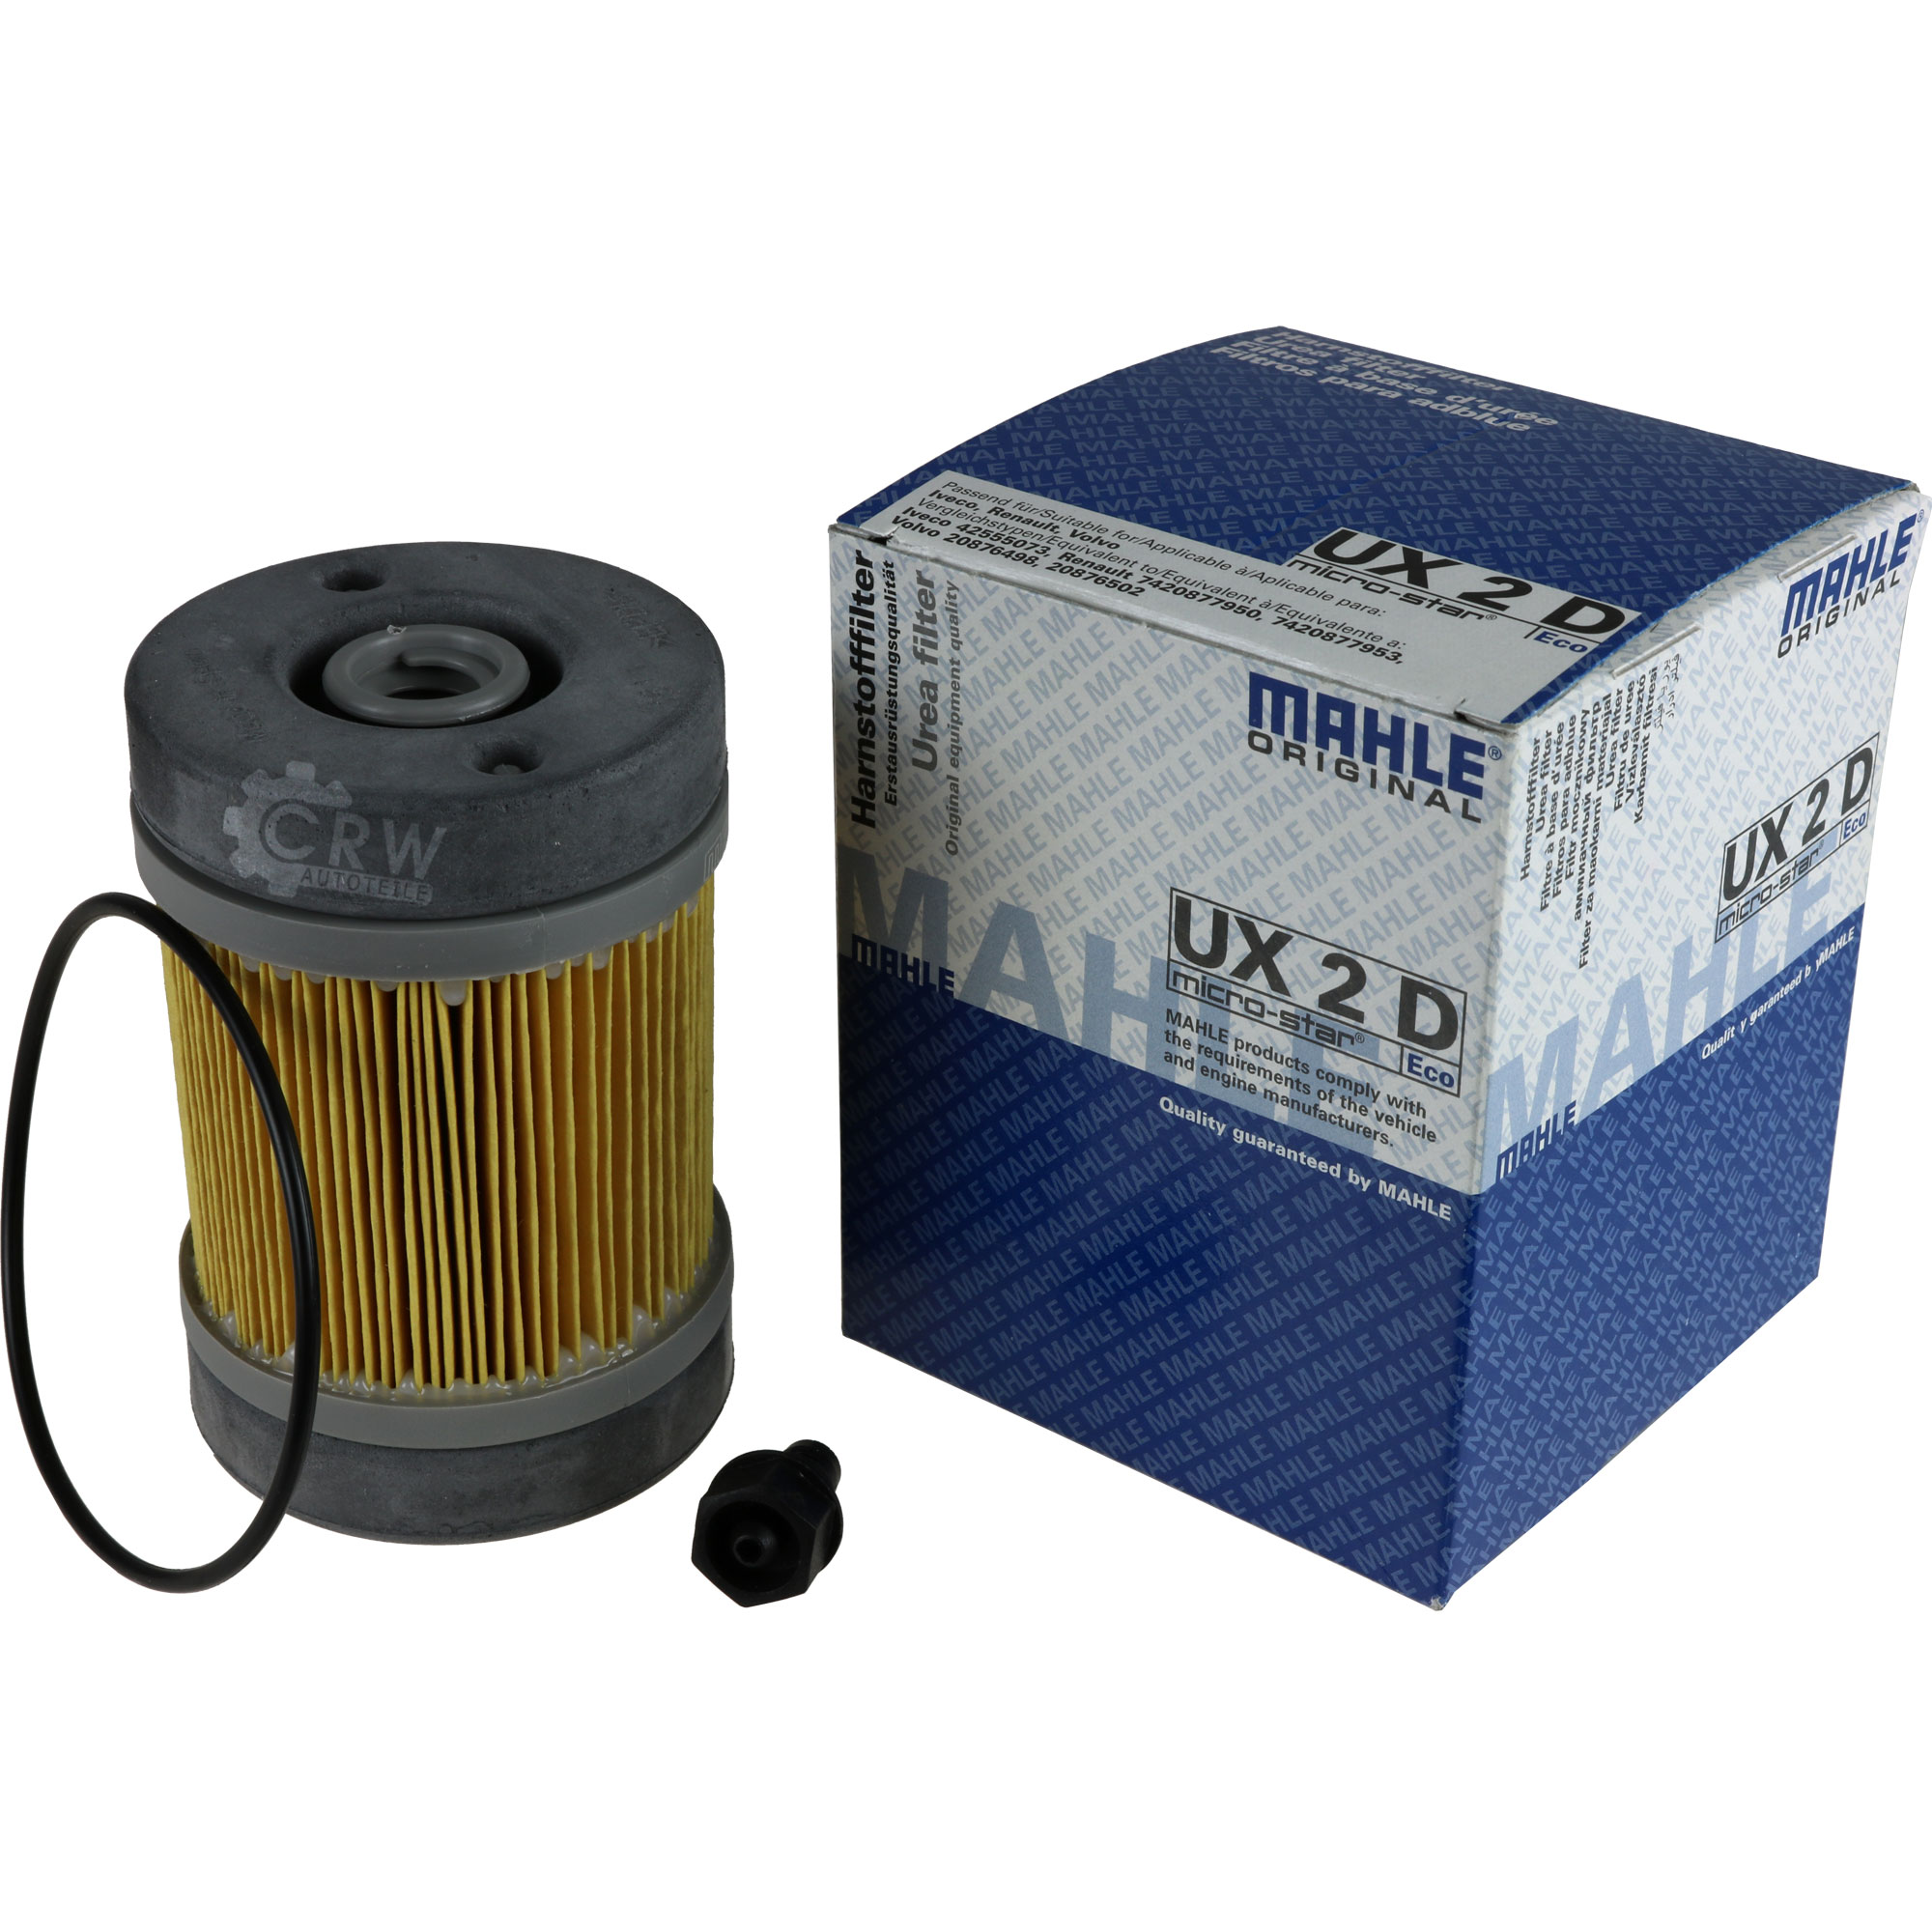 MAHLE Harnstofffilter UX 2D